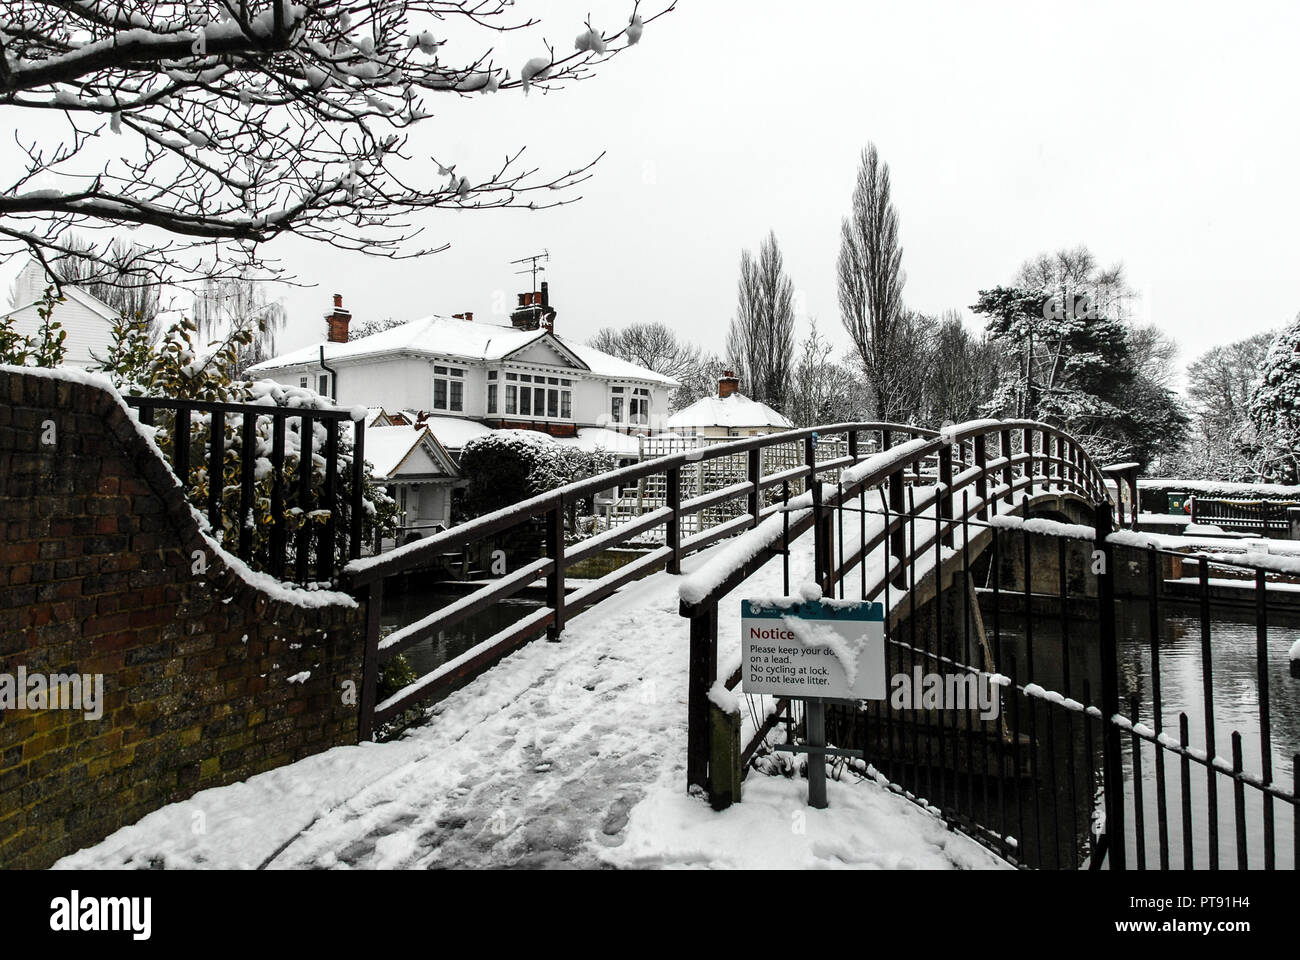 Winter snow scene at Marlow Lock and footbridge over the river Thames at Marlow in Buckinghamshire, Britain Stock Photo